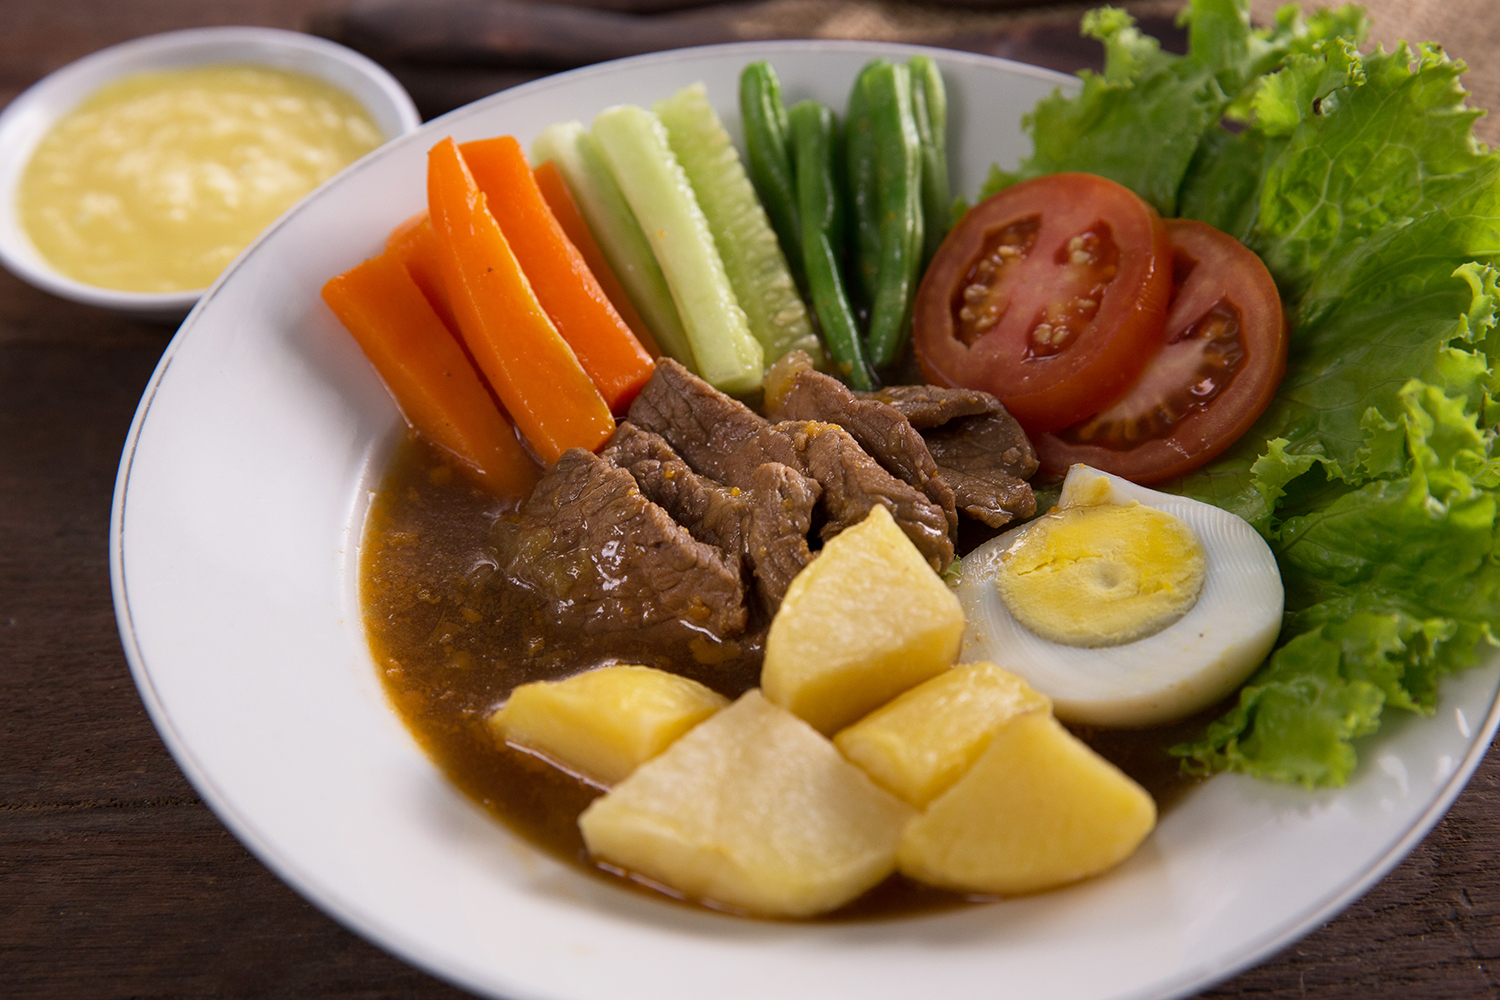  Selat  Solo Traditional Beef Dish From Surakarta Indonesia